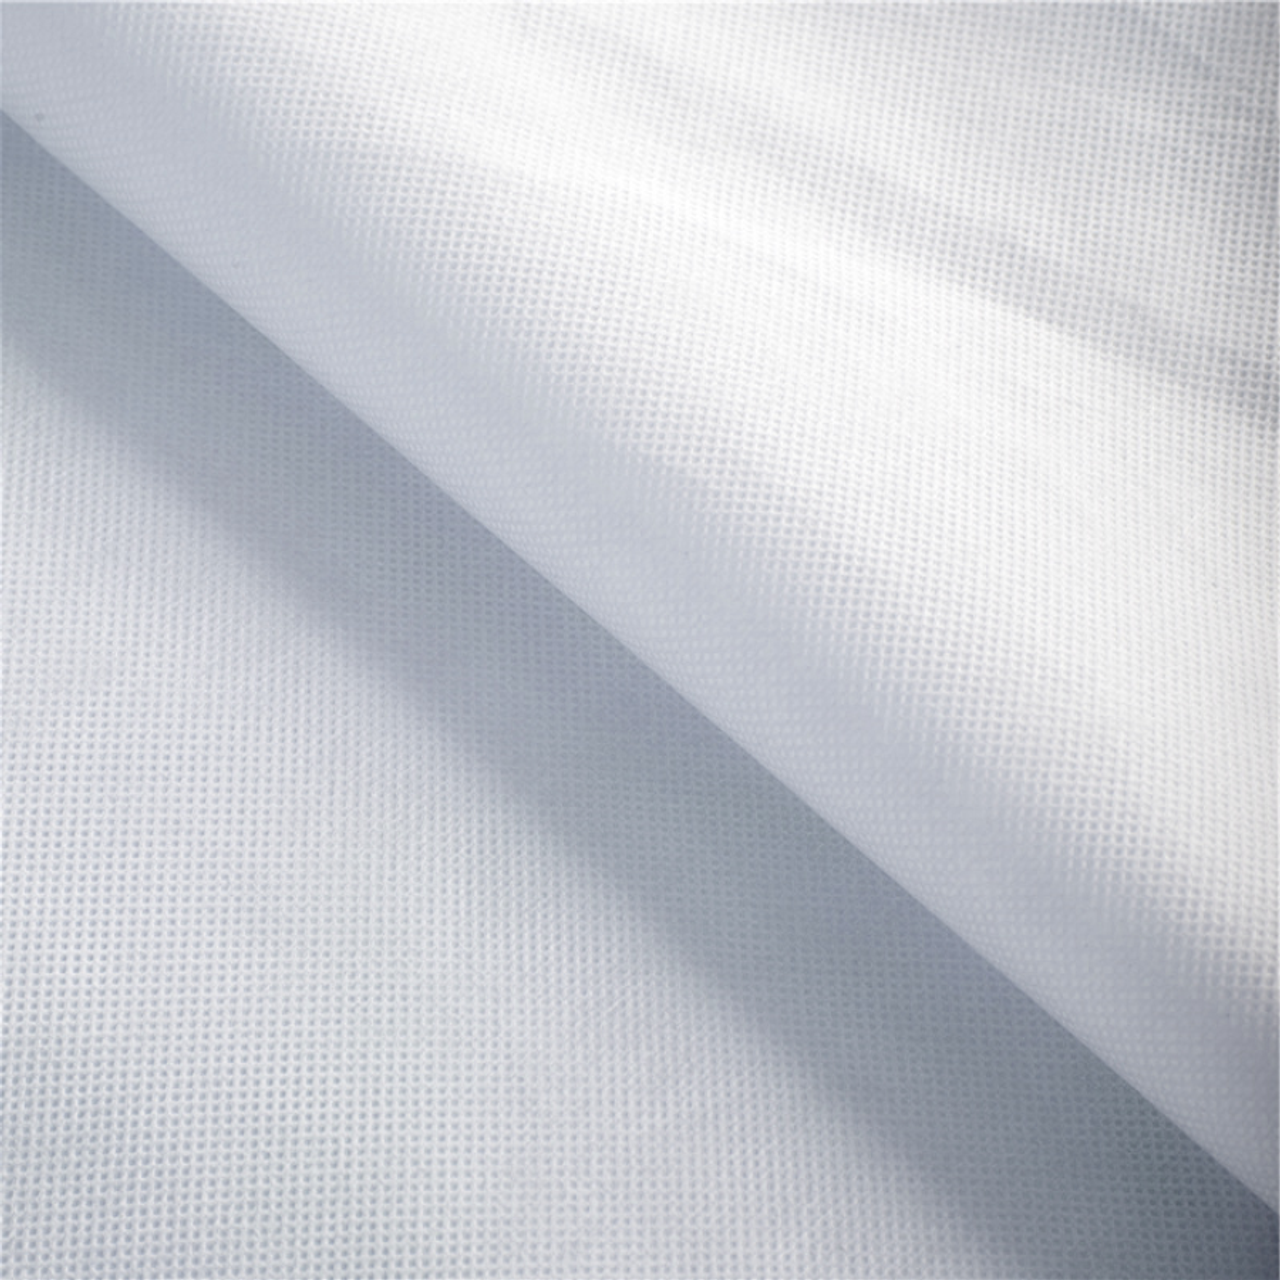 Hypoallergenic Zippered Liquid-Proof Mattress and Pillowcase Protectors product image